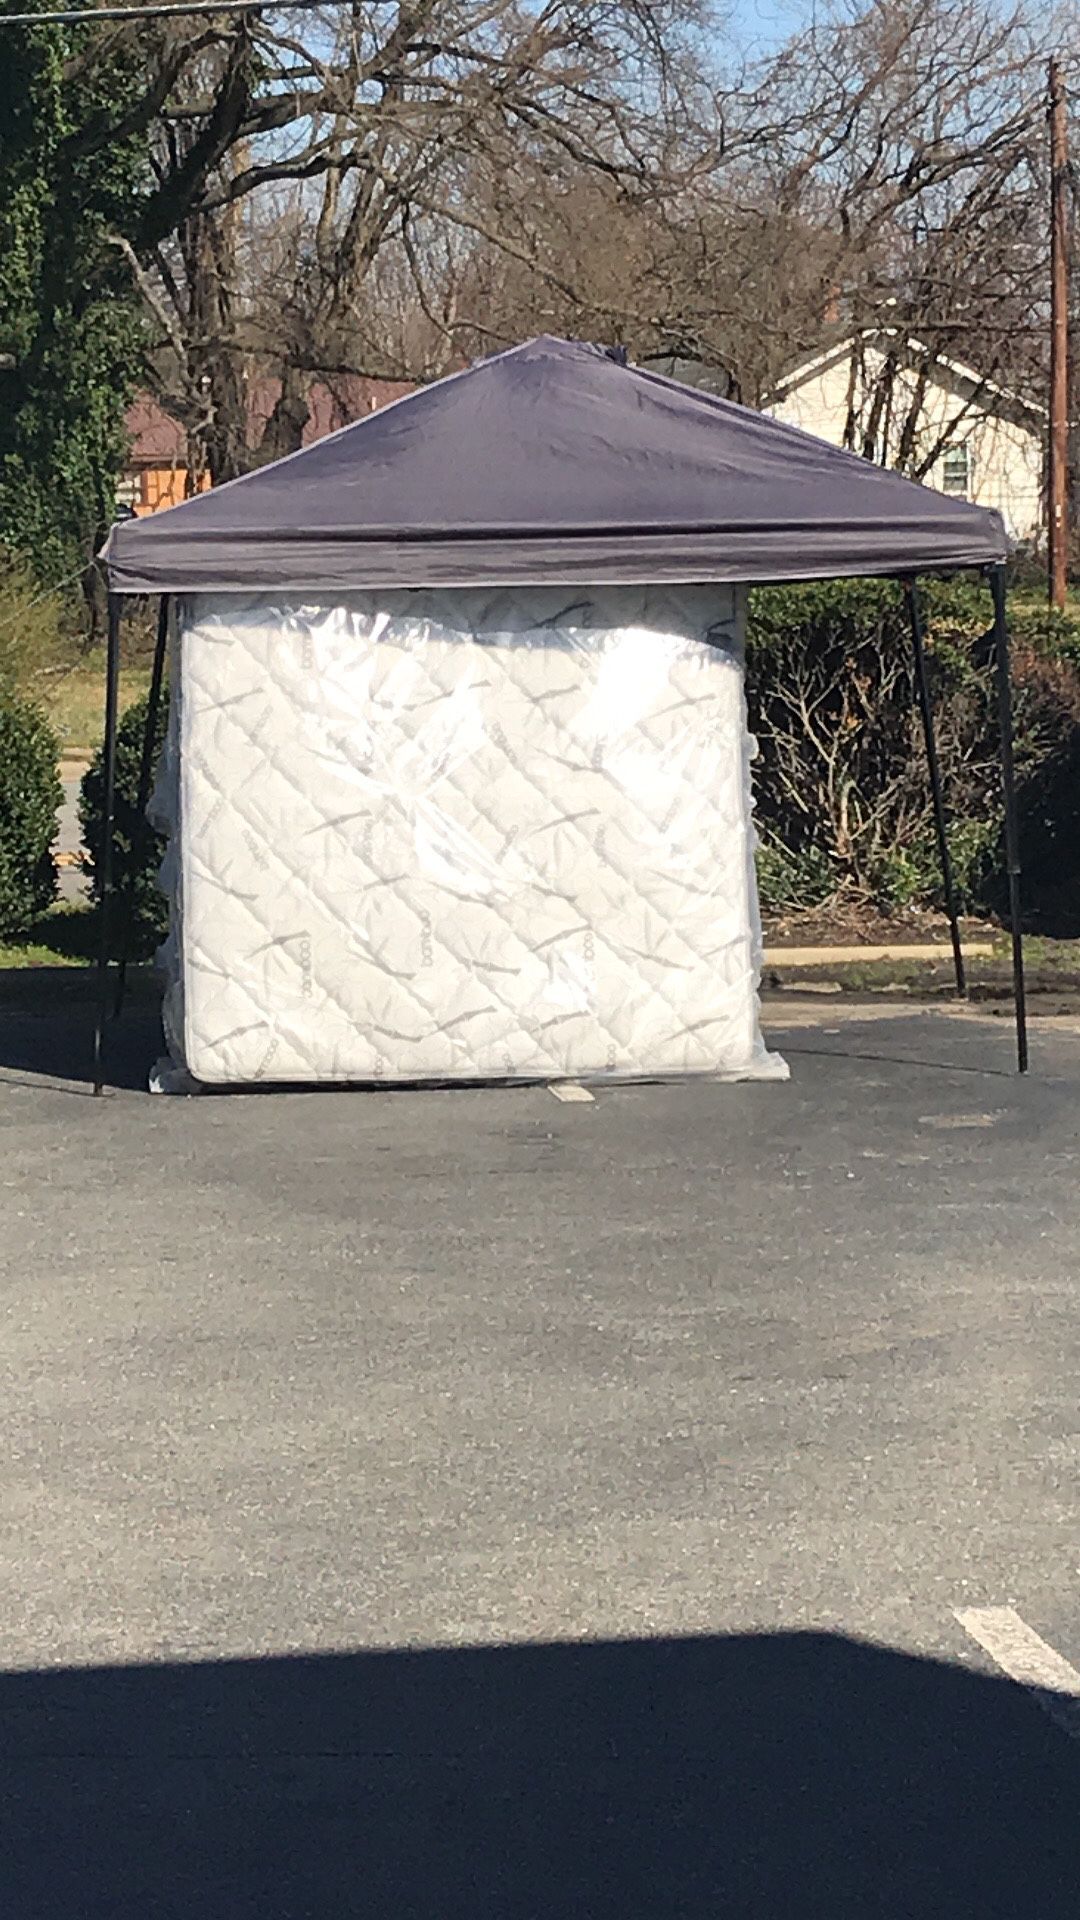 Mattress tent sale going on with queen size sets